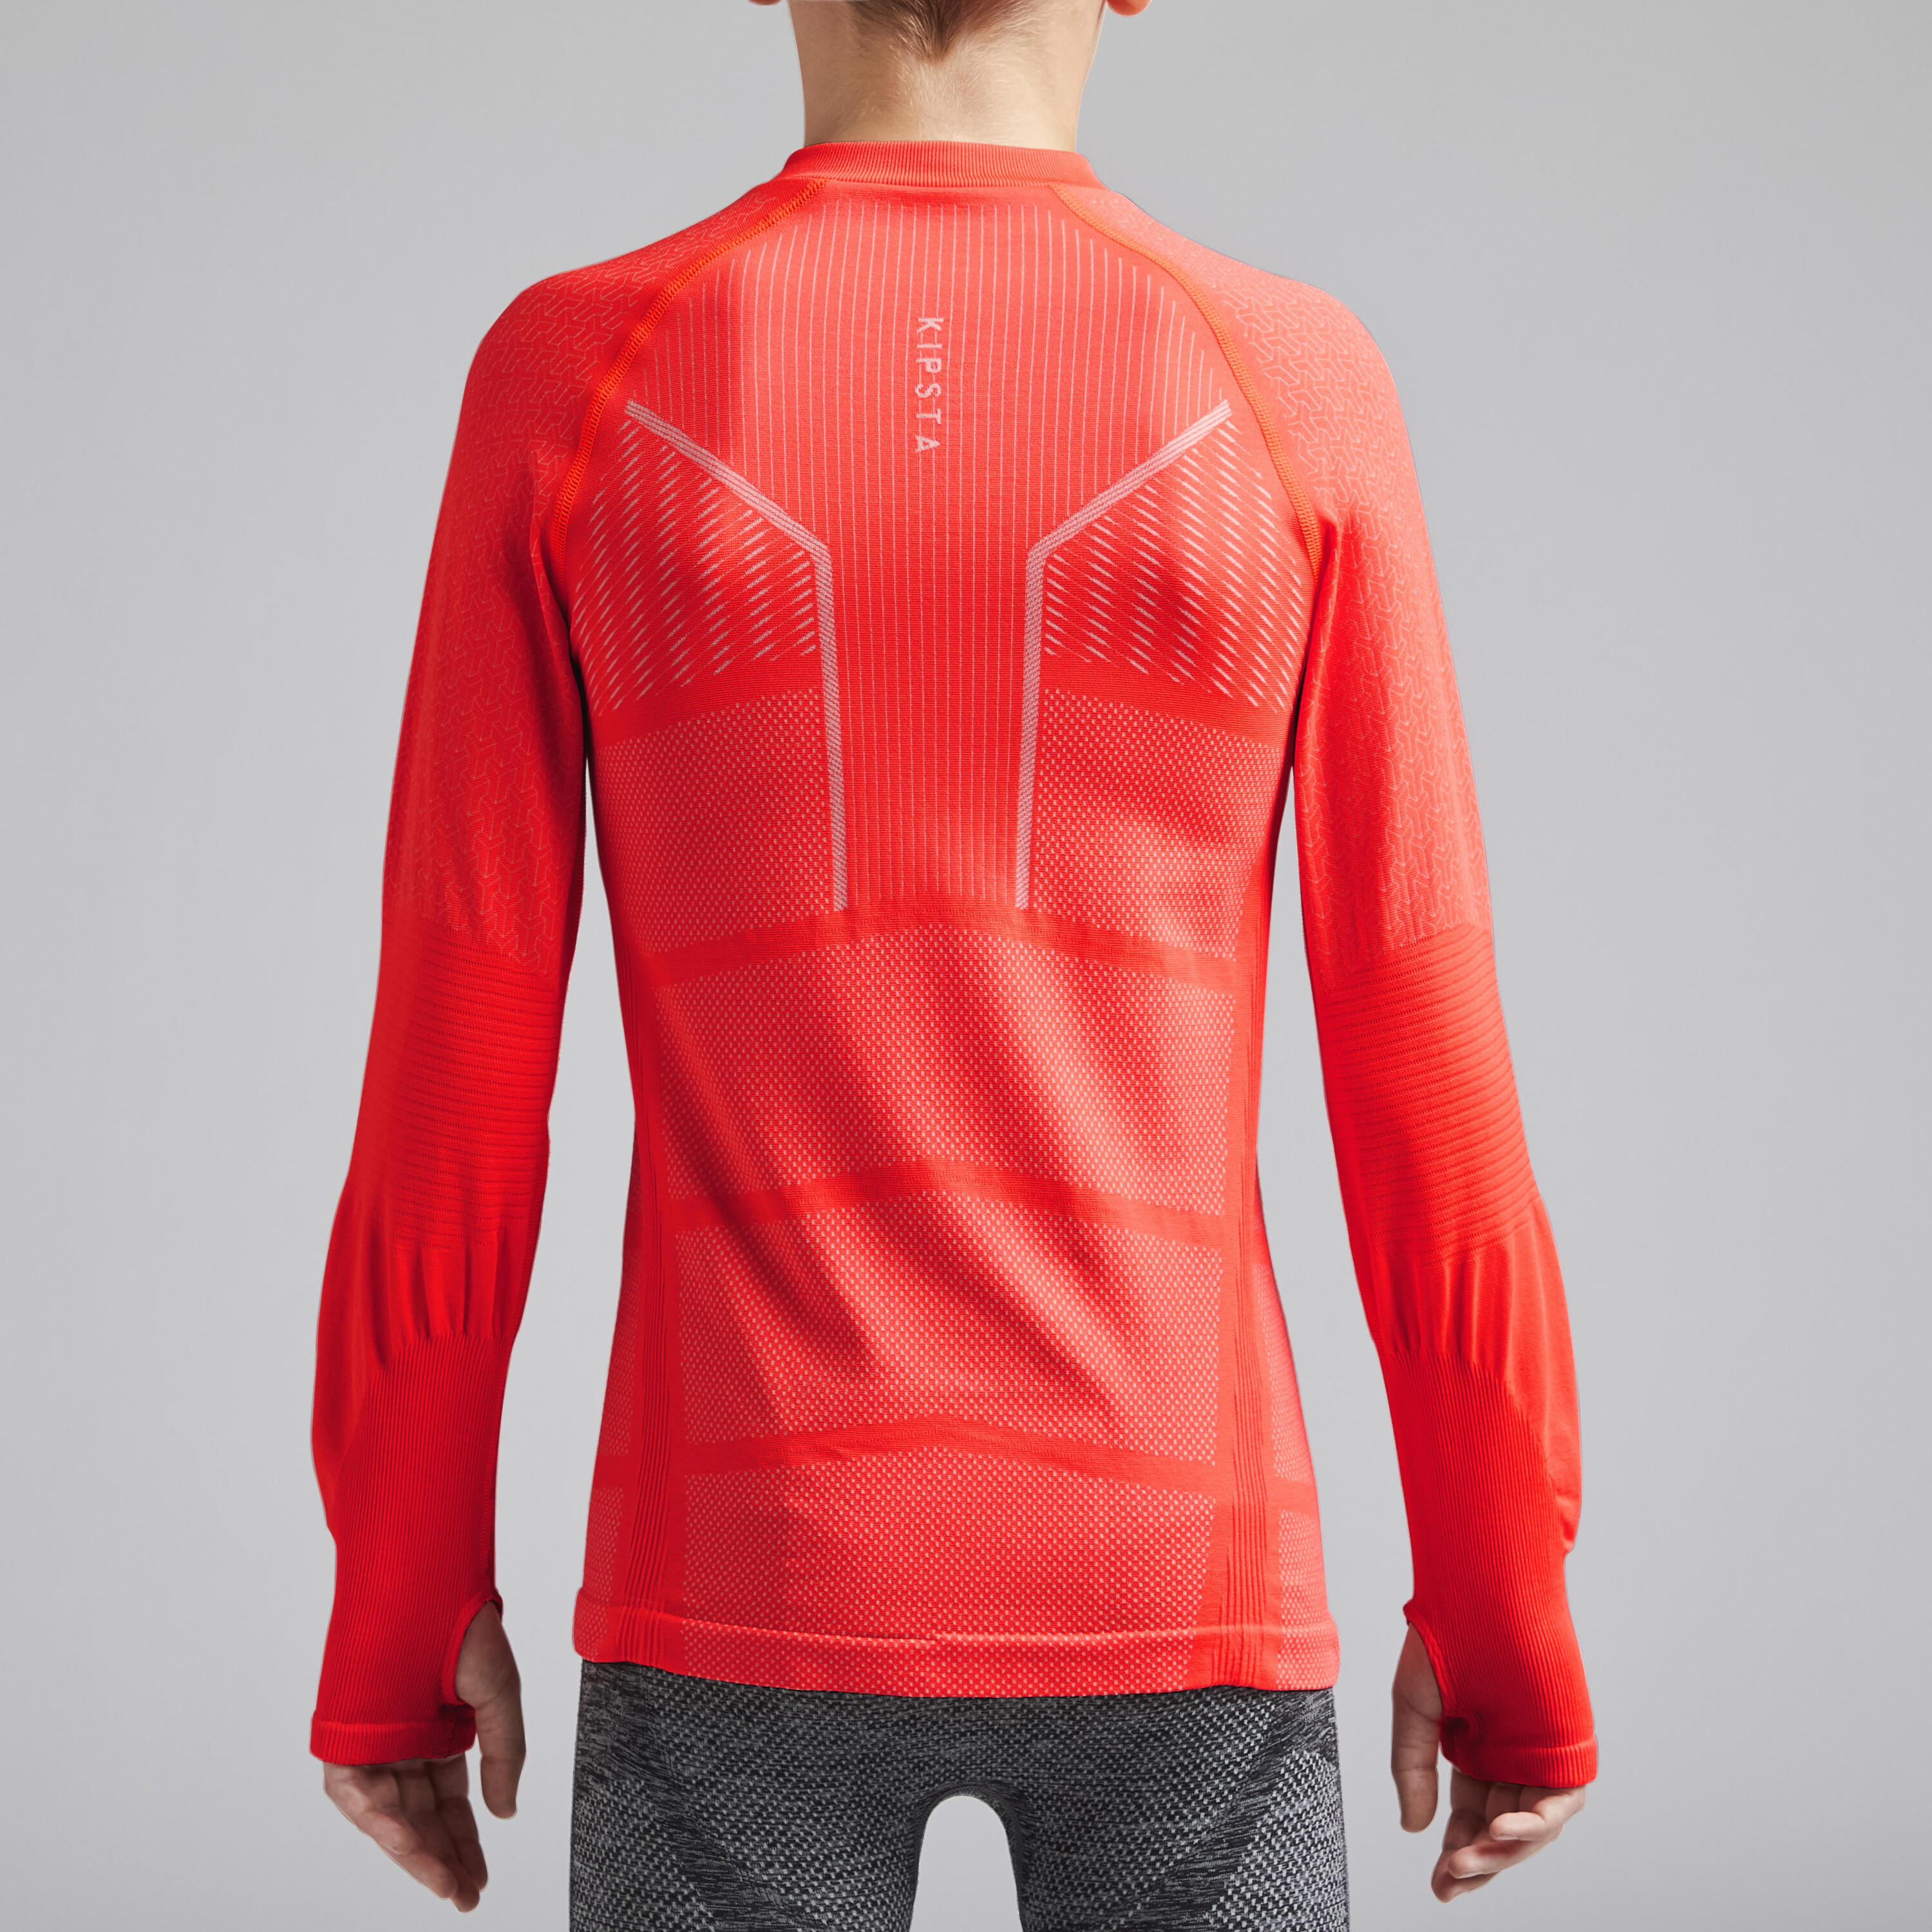 Kids' Long-Sleeved Football Base Layer Top Keepdry 500 - Red 3/9